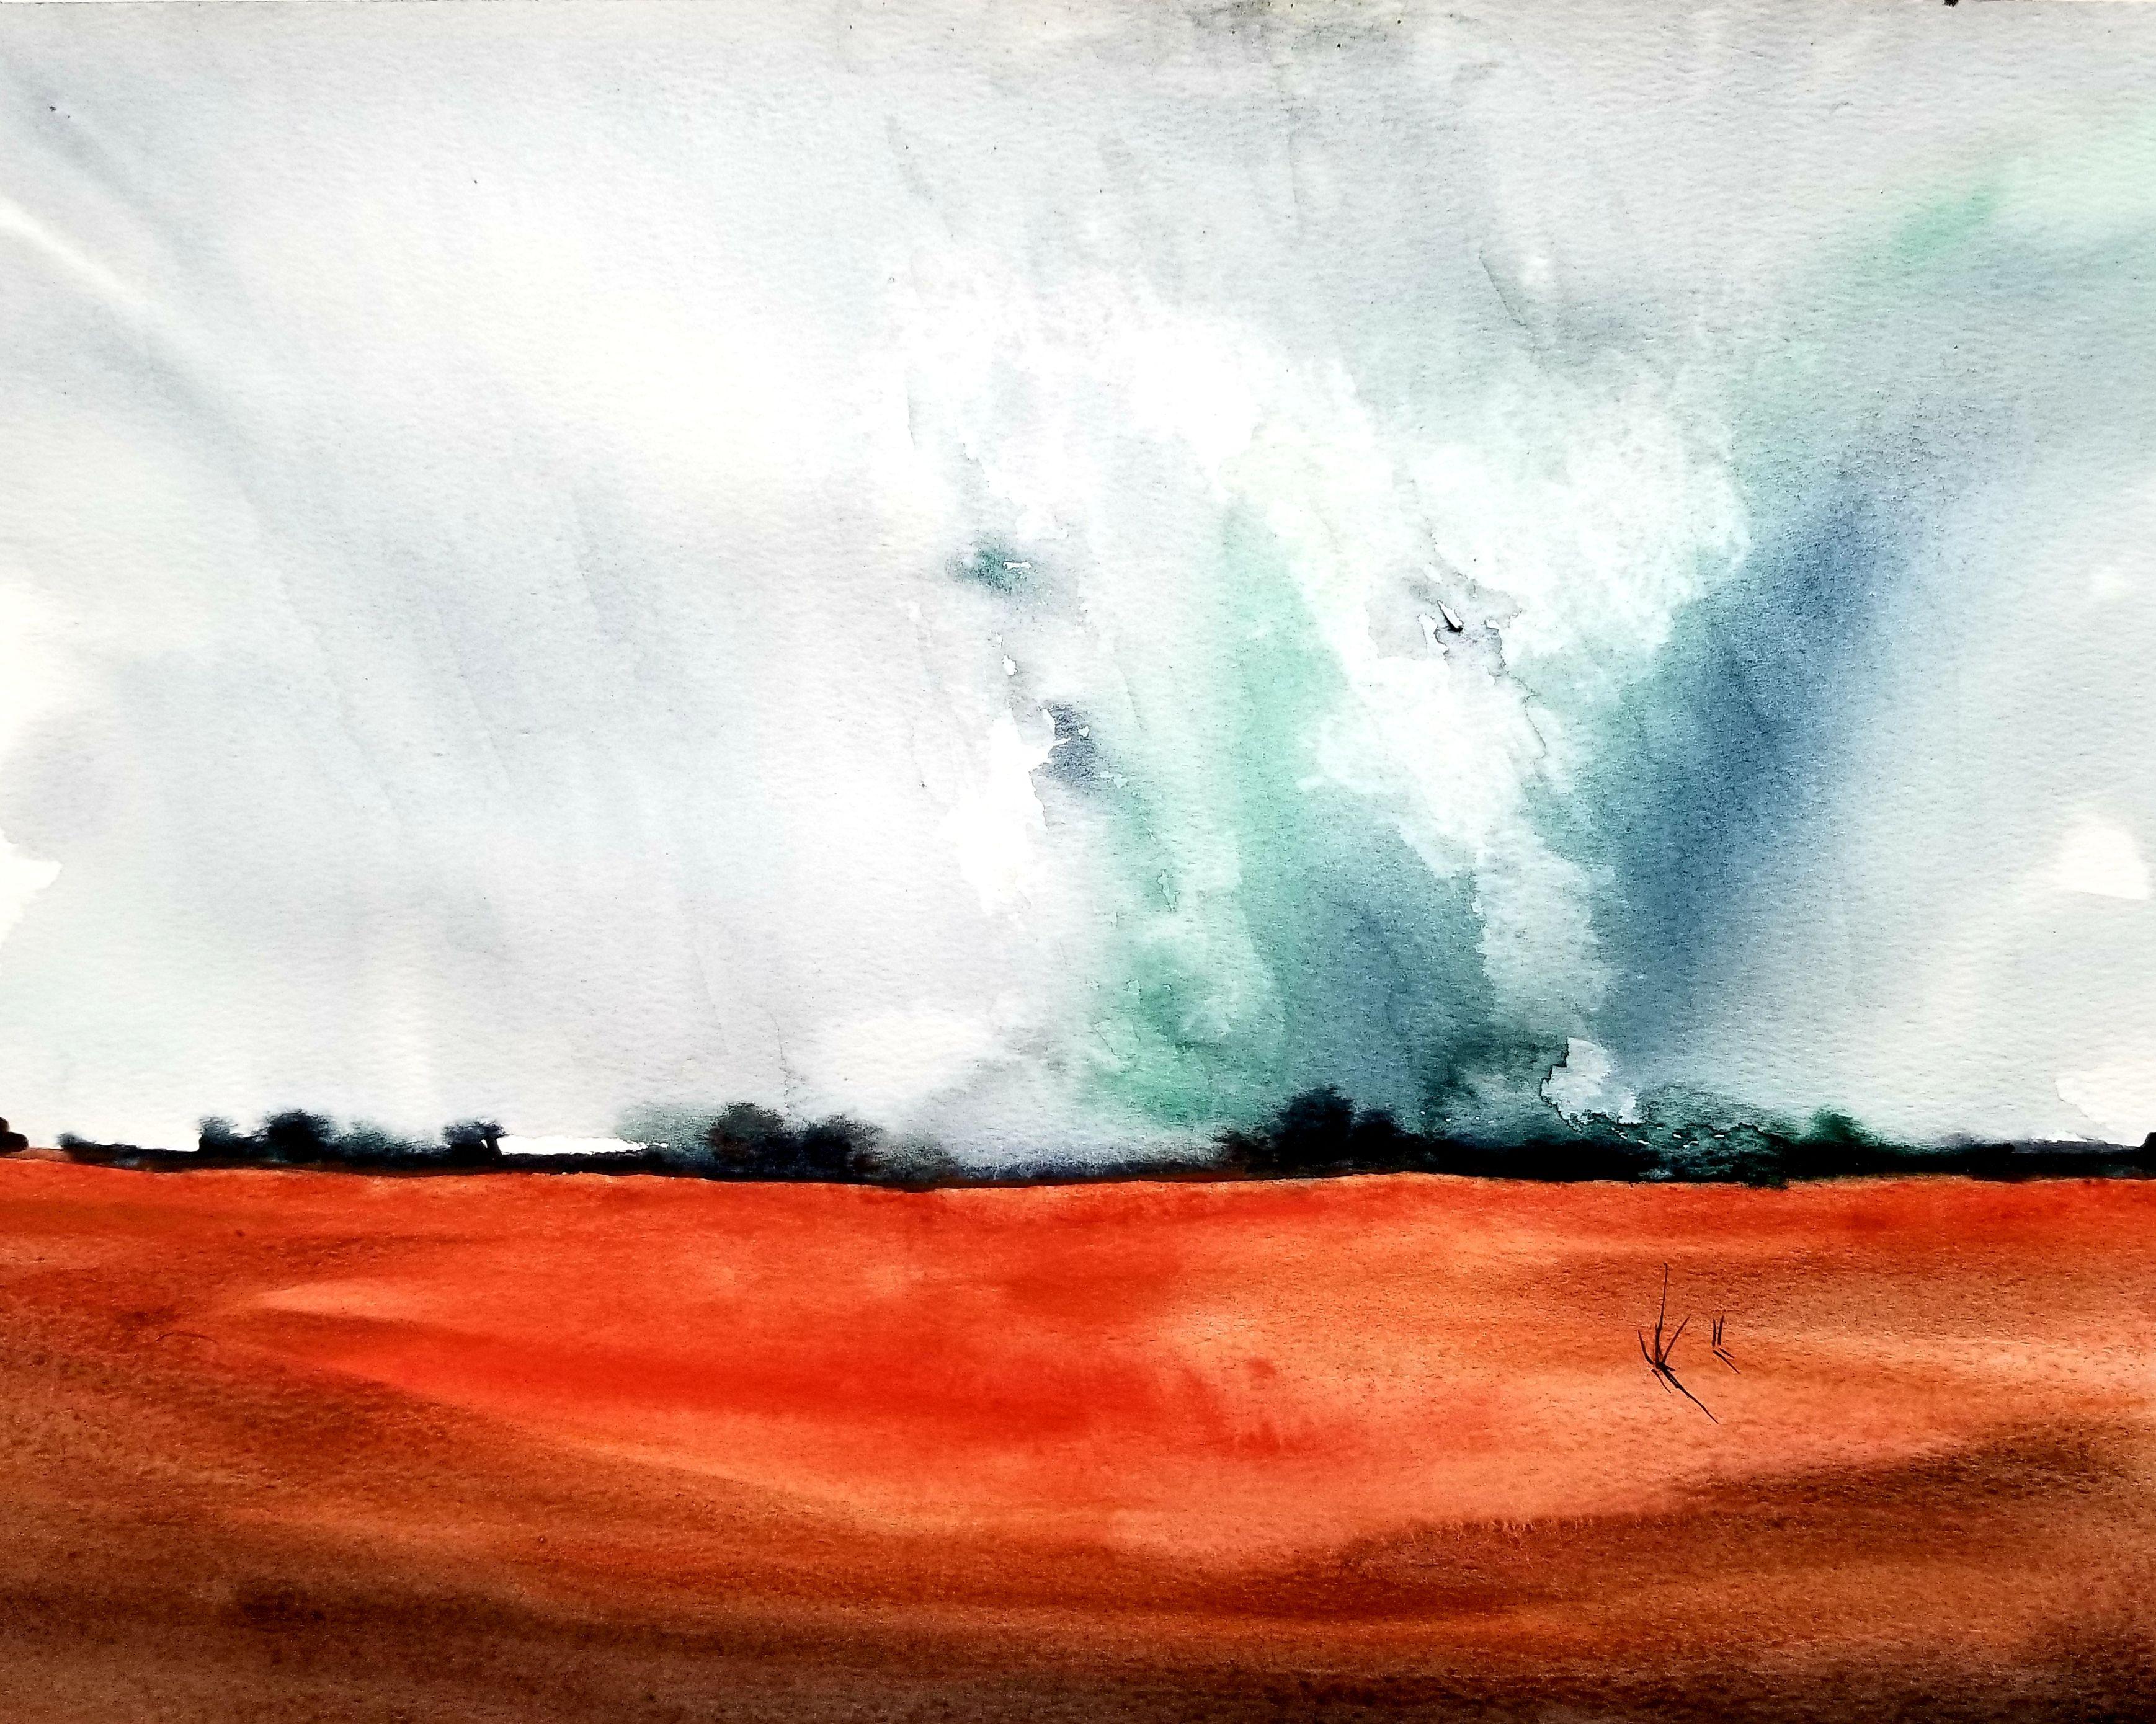 Colored Fields, Painting, Watercolor on Watercolor Paper - Art by Jim Lagasse